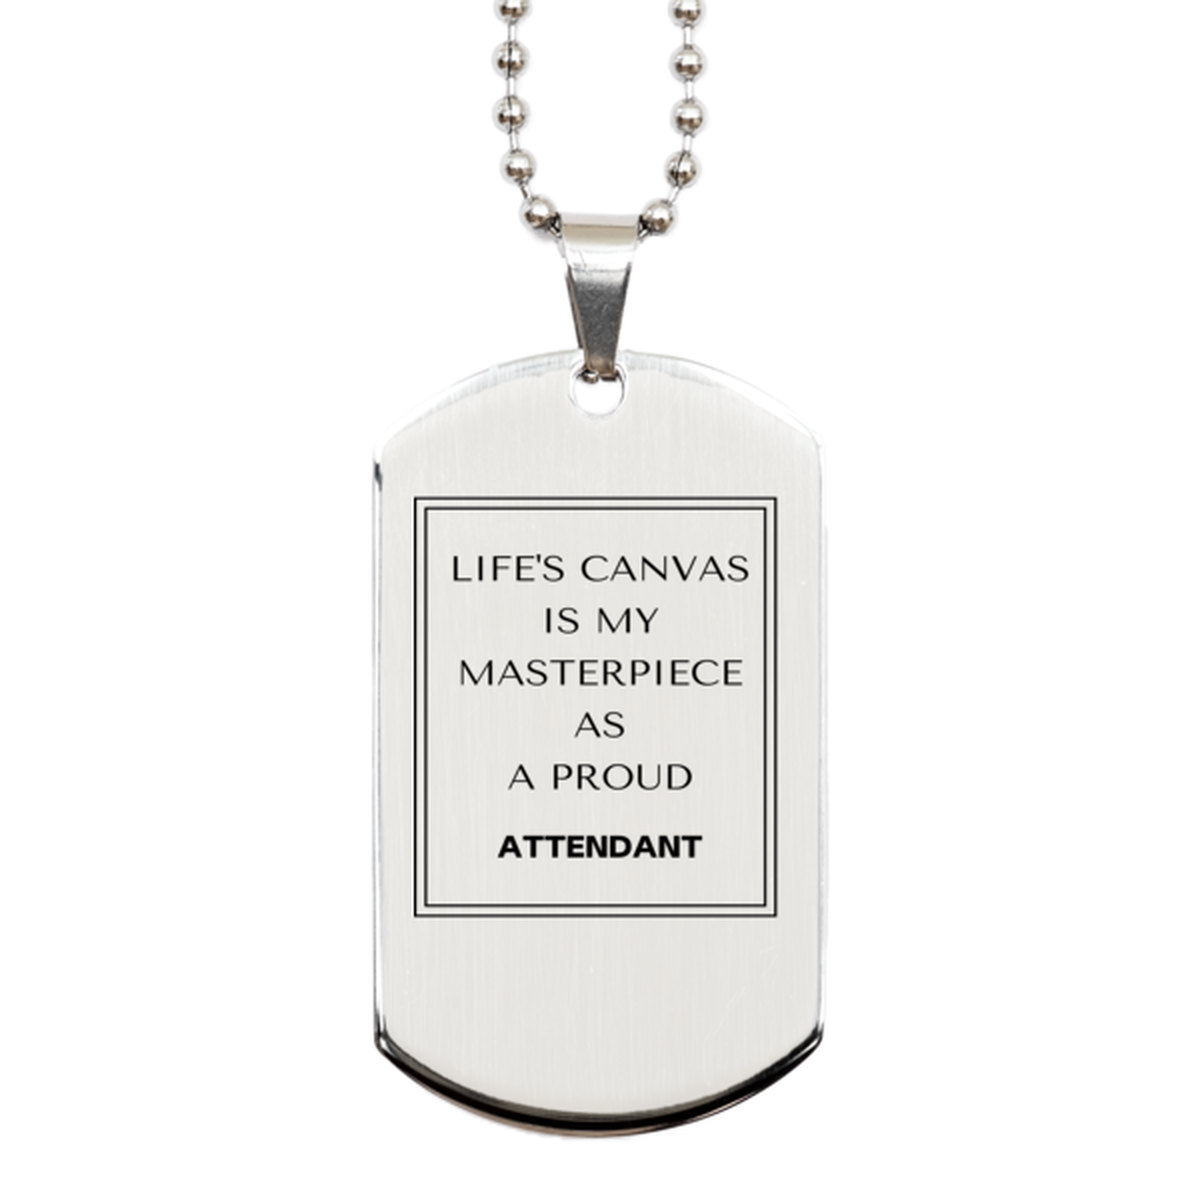 Proud Attendant Gifts, Life's canvas is my masterpiece, Epic Birthday Christmas Unique Silver Dog Tag For Attendant, Coworkers, Men, Women, Friends